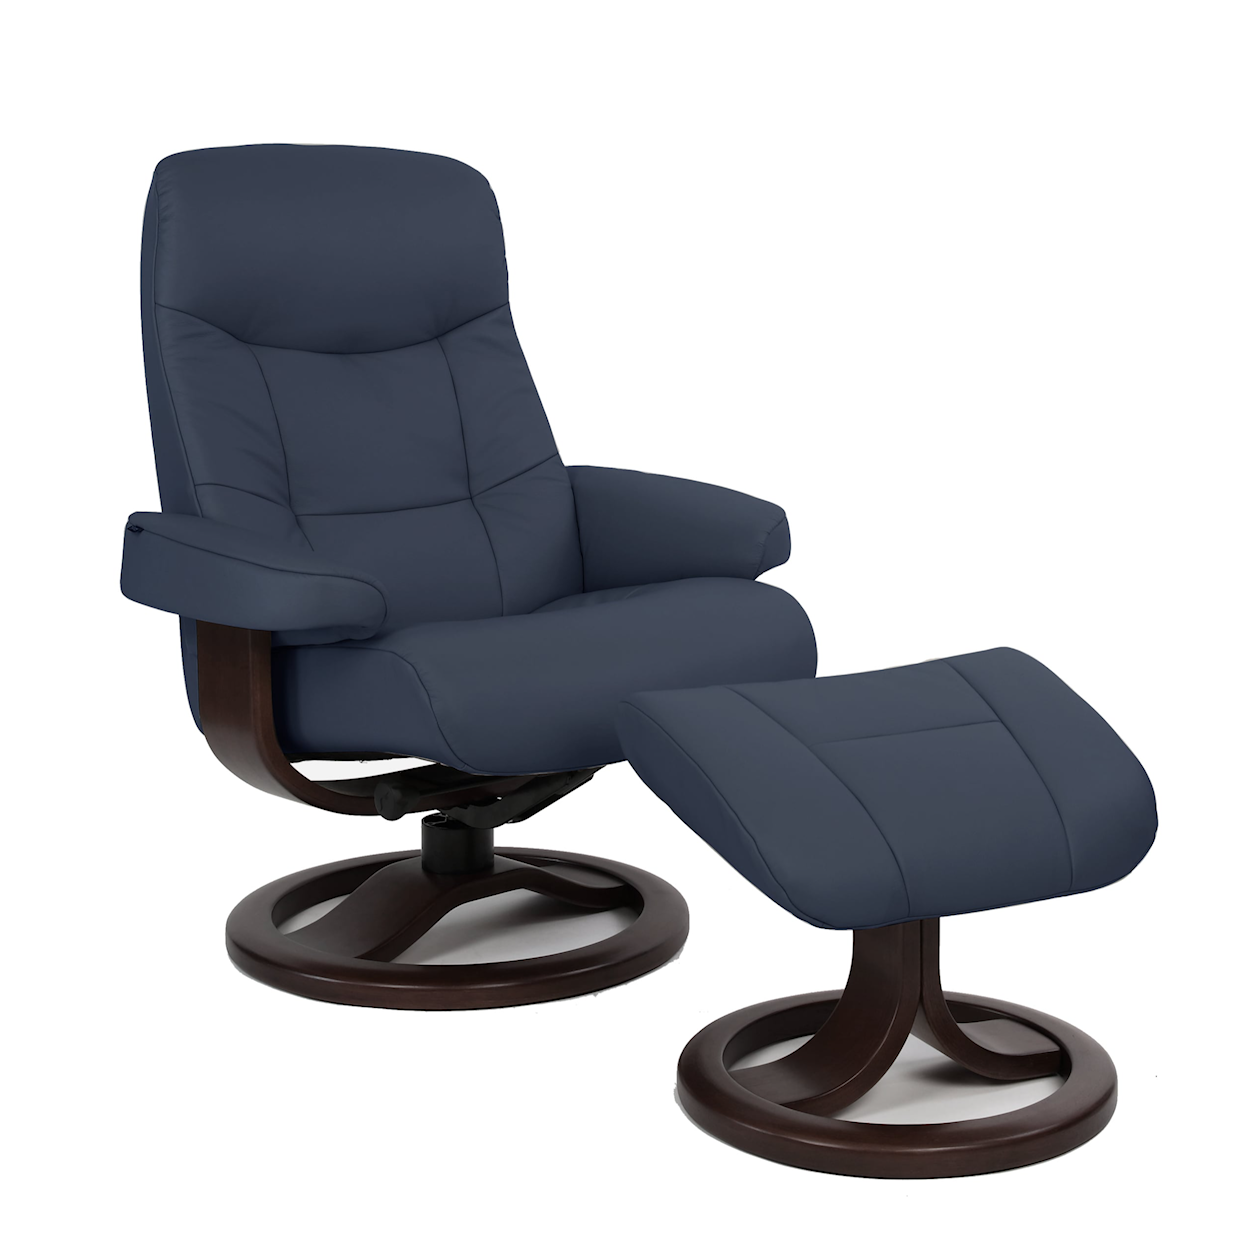 Fjords by Hjellegjerde Classic Comfort Collection Muldal R Large Manual Recliner W/ Footstool